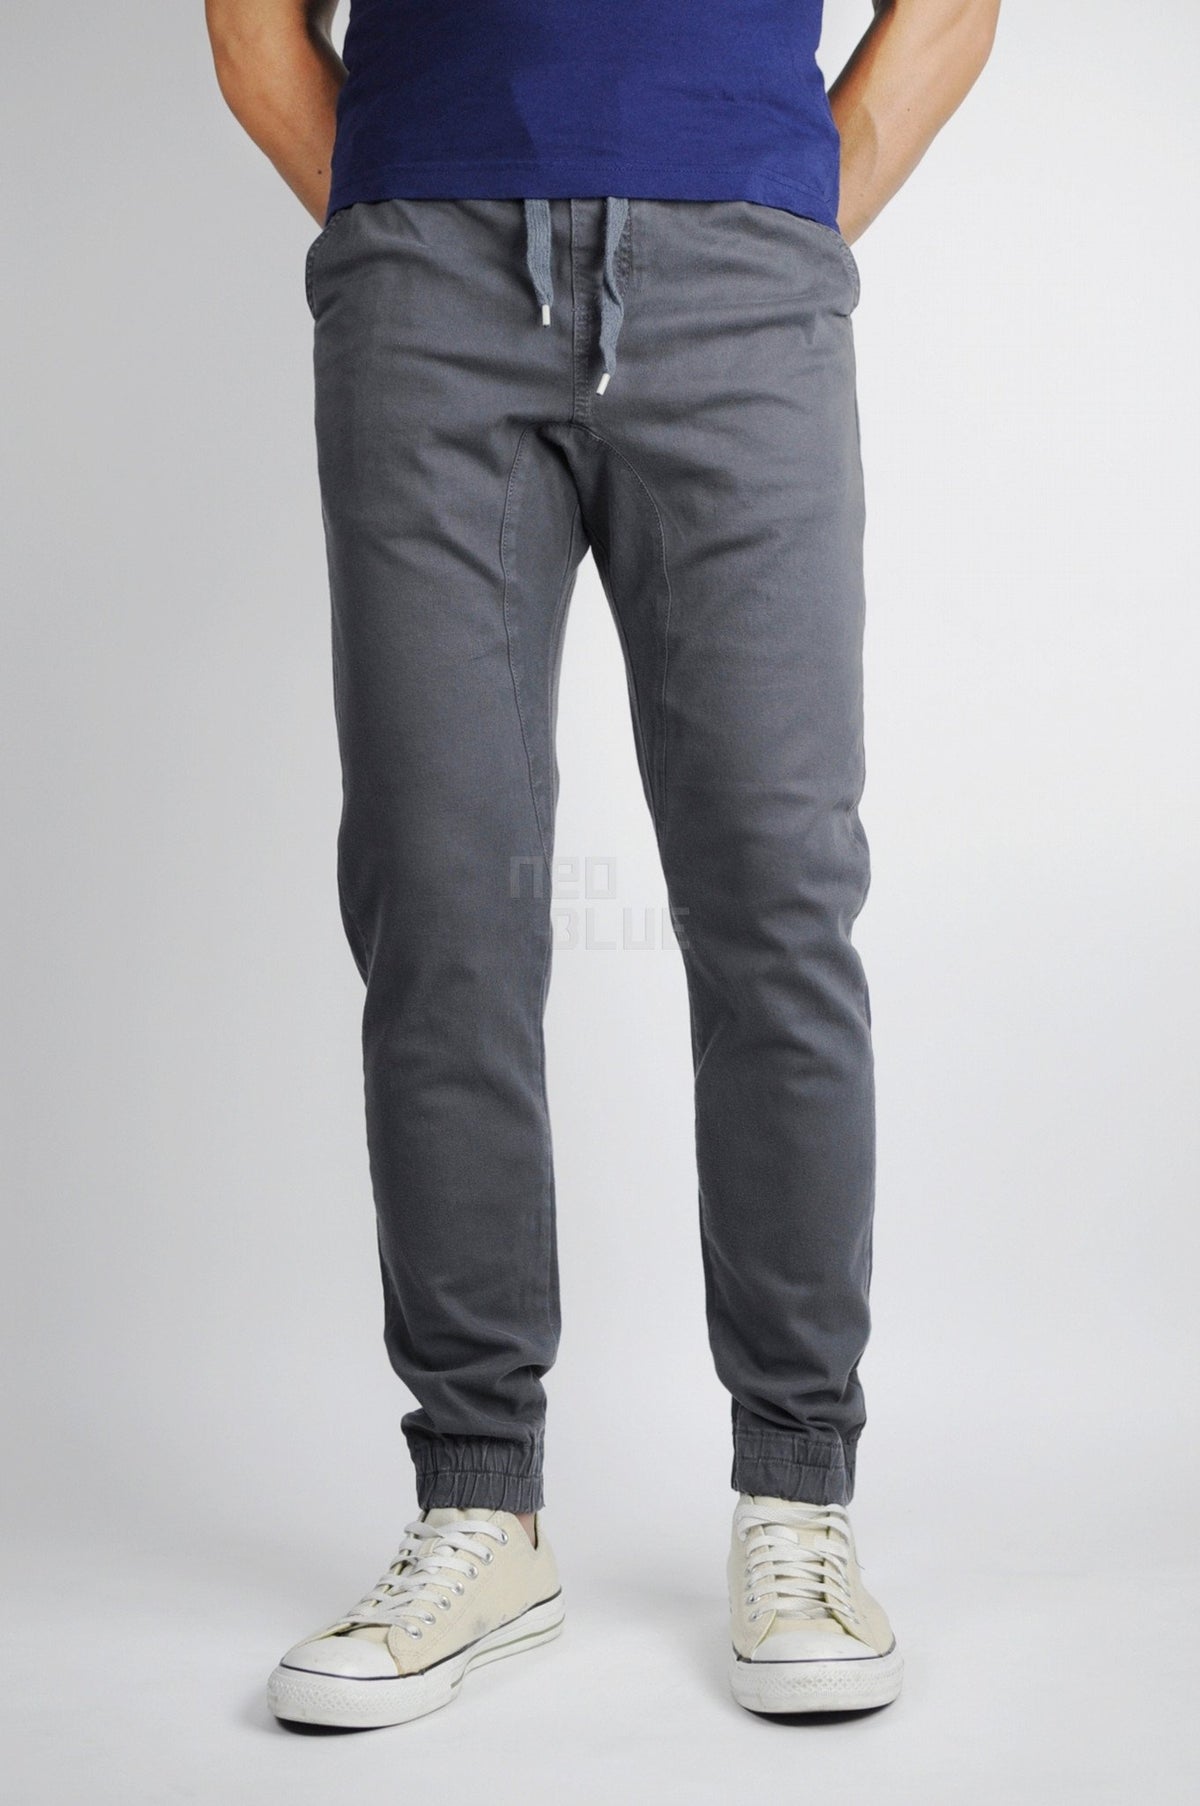 Neo Blue Twill Joggers (Charcoal)